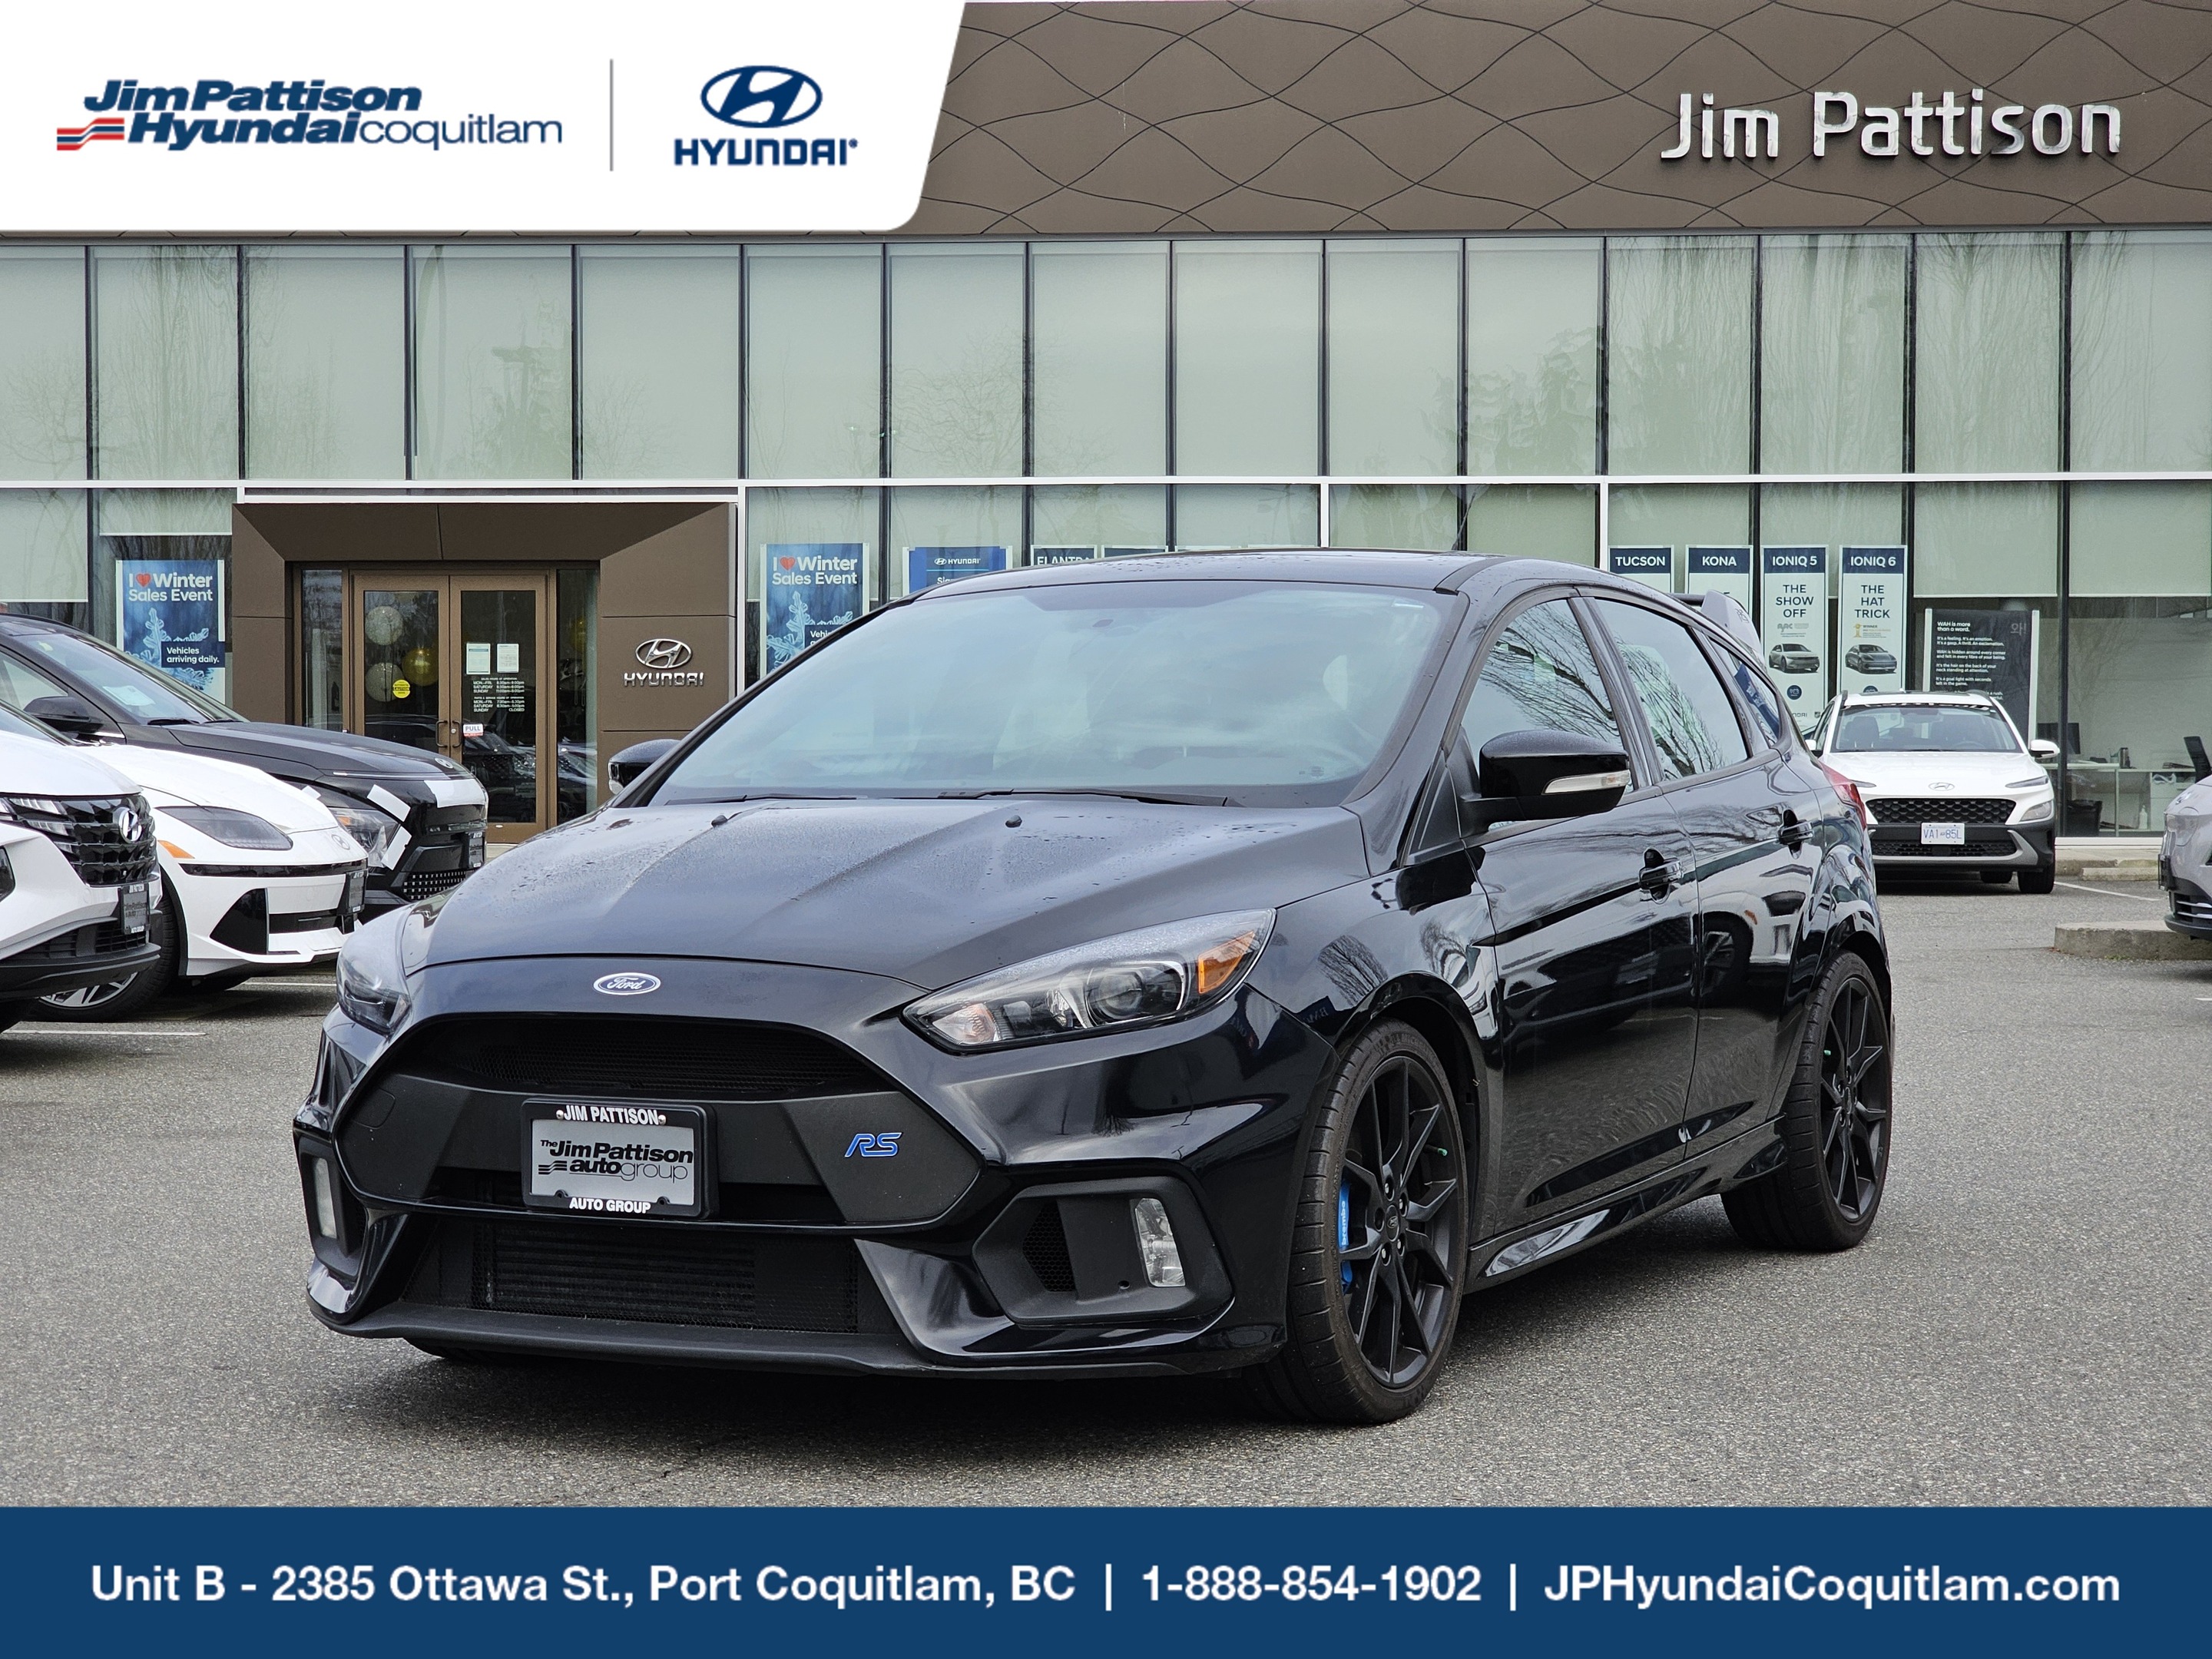 2017 Ford Focus 5dr HB RS, NO Accident Local CLEAROUT PRICE